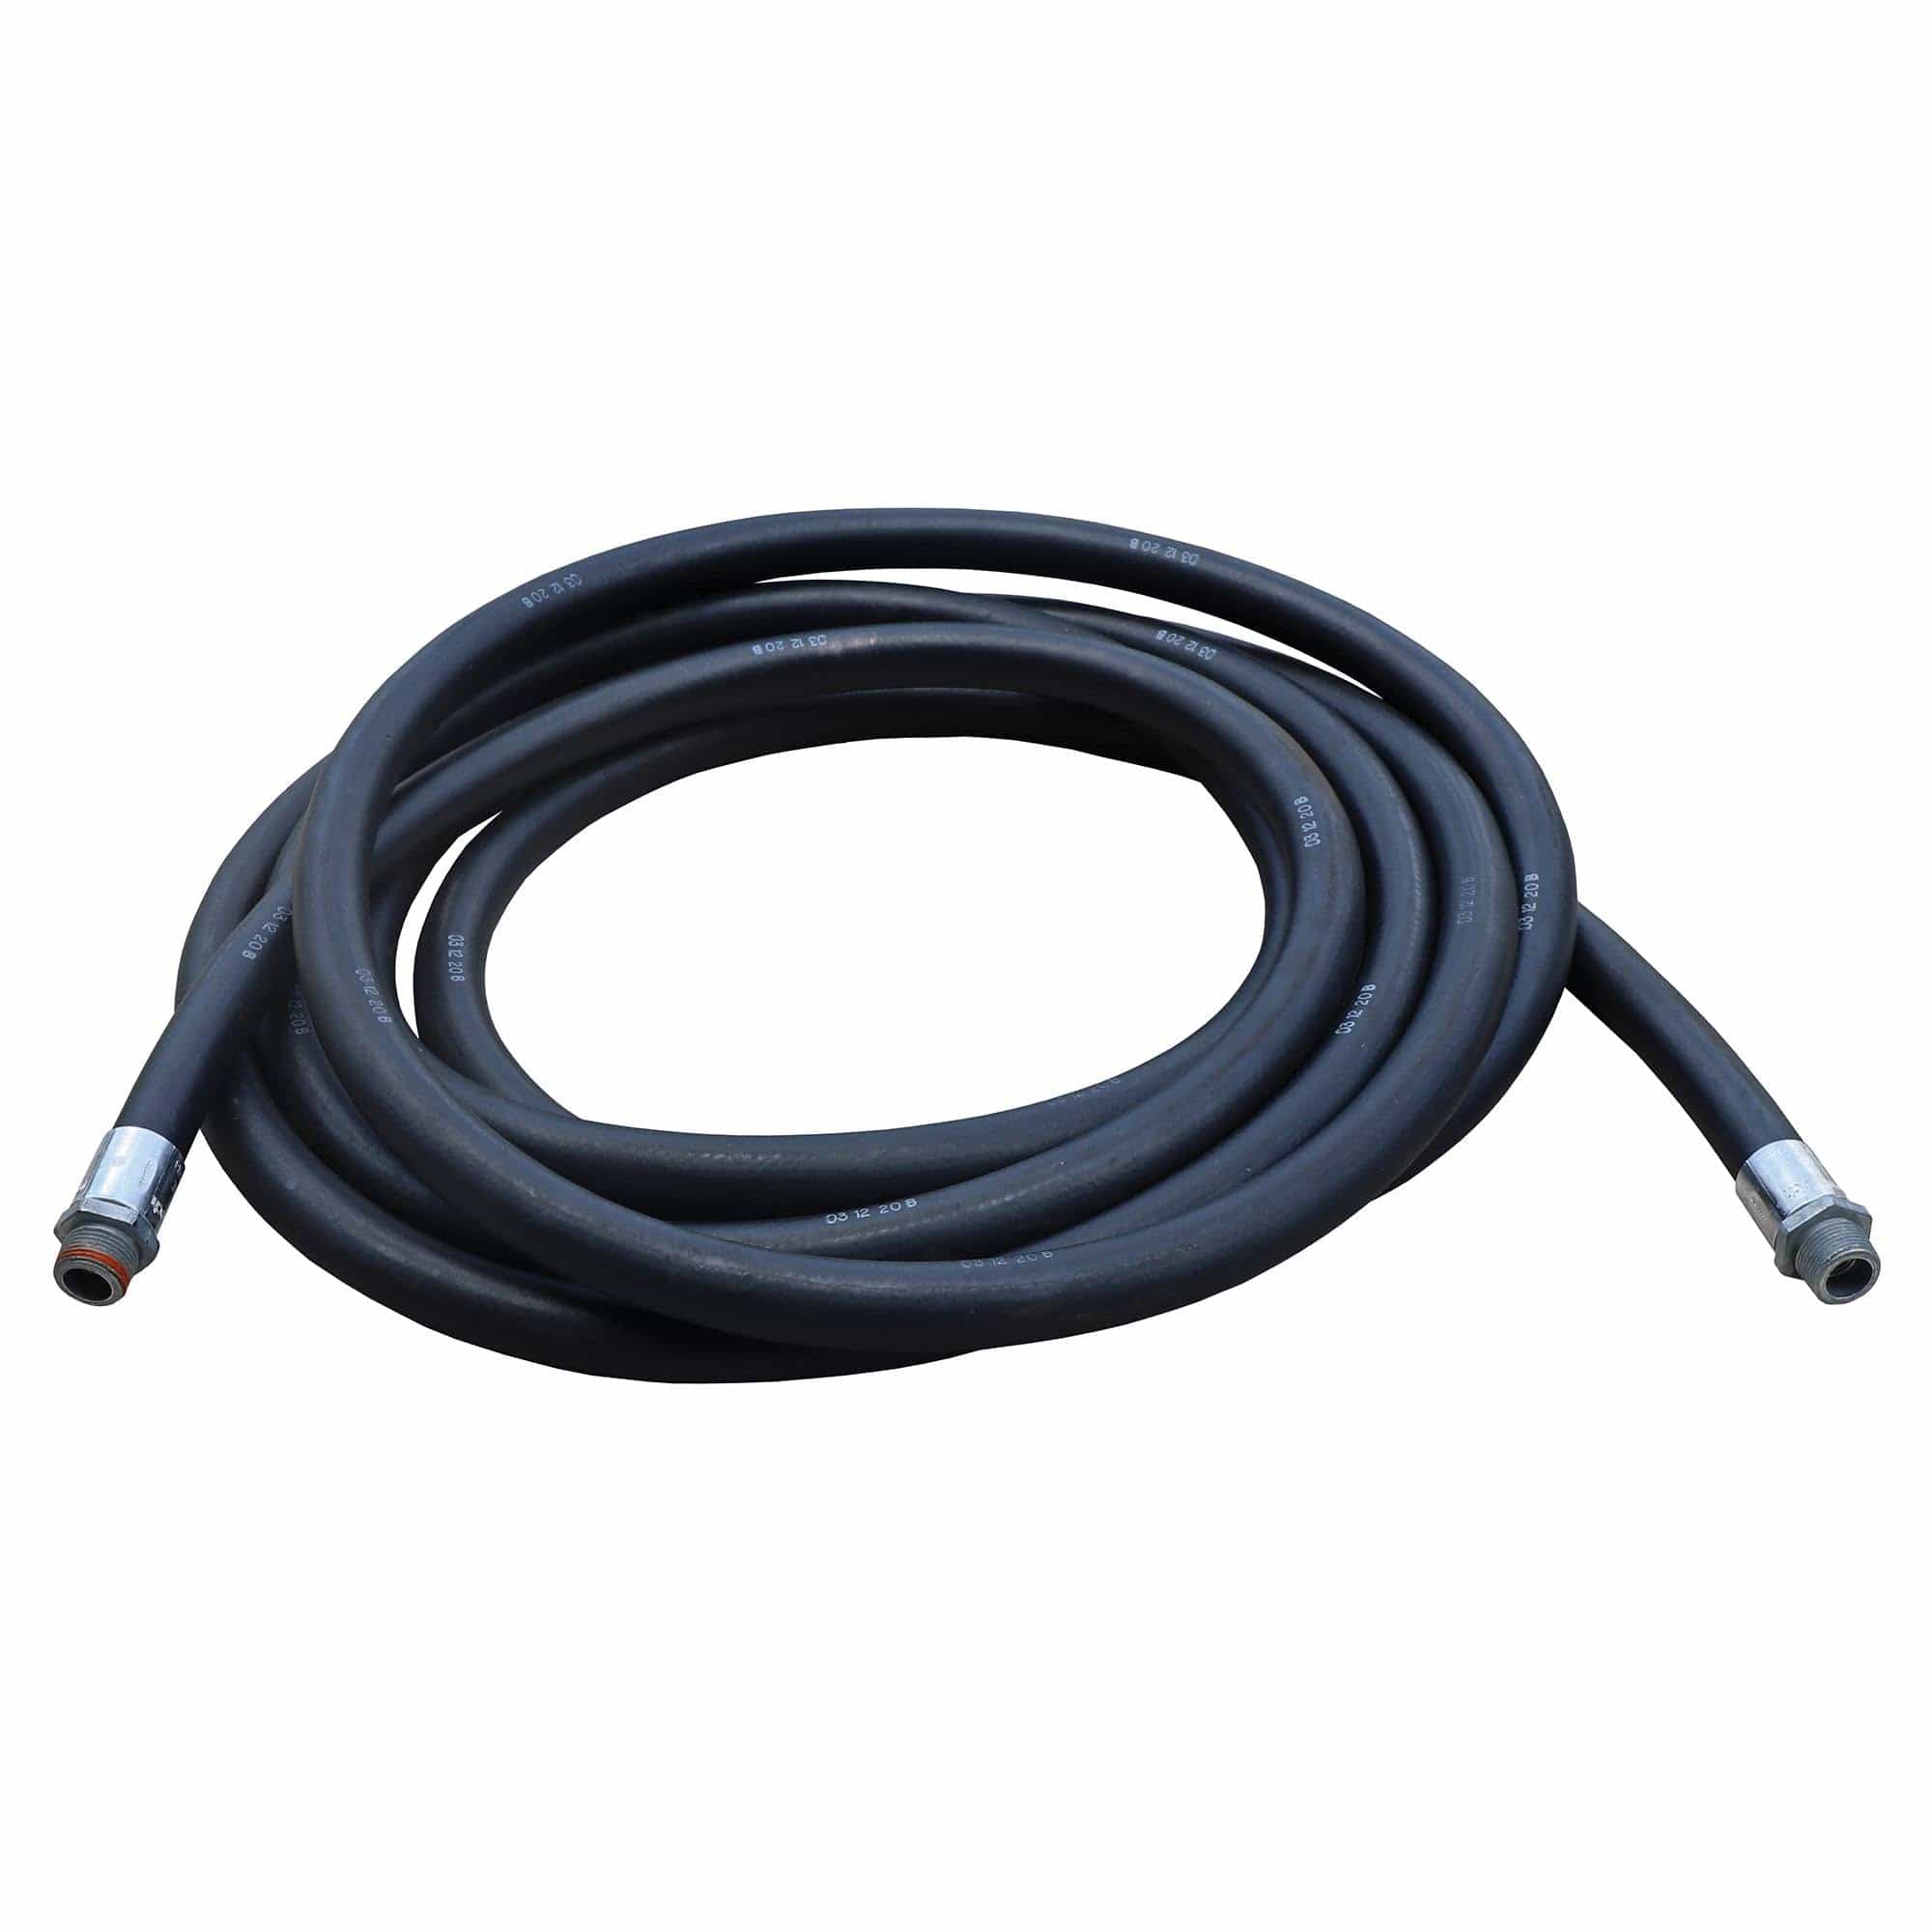 Find high-quality dry powder fire extinguisher hoses at Supply Master Ghana, Accra. Our durable and reliable hoses are designed for effective fire suppression, allowing for the controlled discharge of dry powder to extinguish fires quickly and efficiently. Fire Extinguisher Buy Tools hardware Building materials